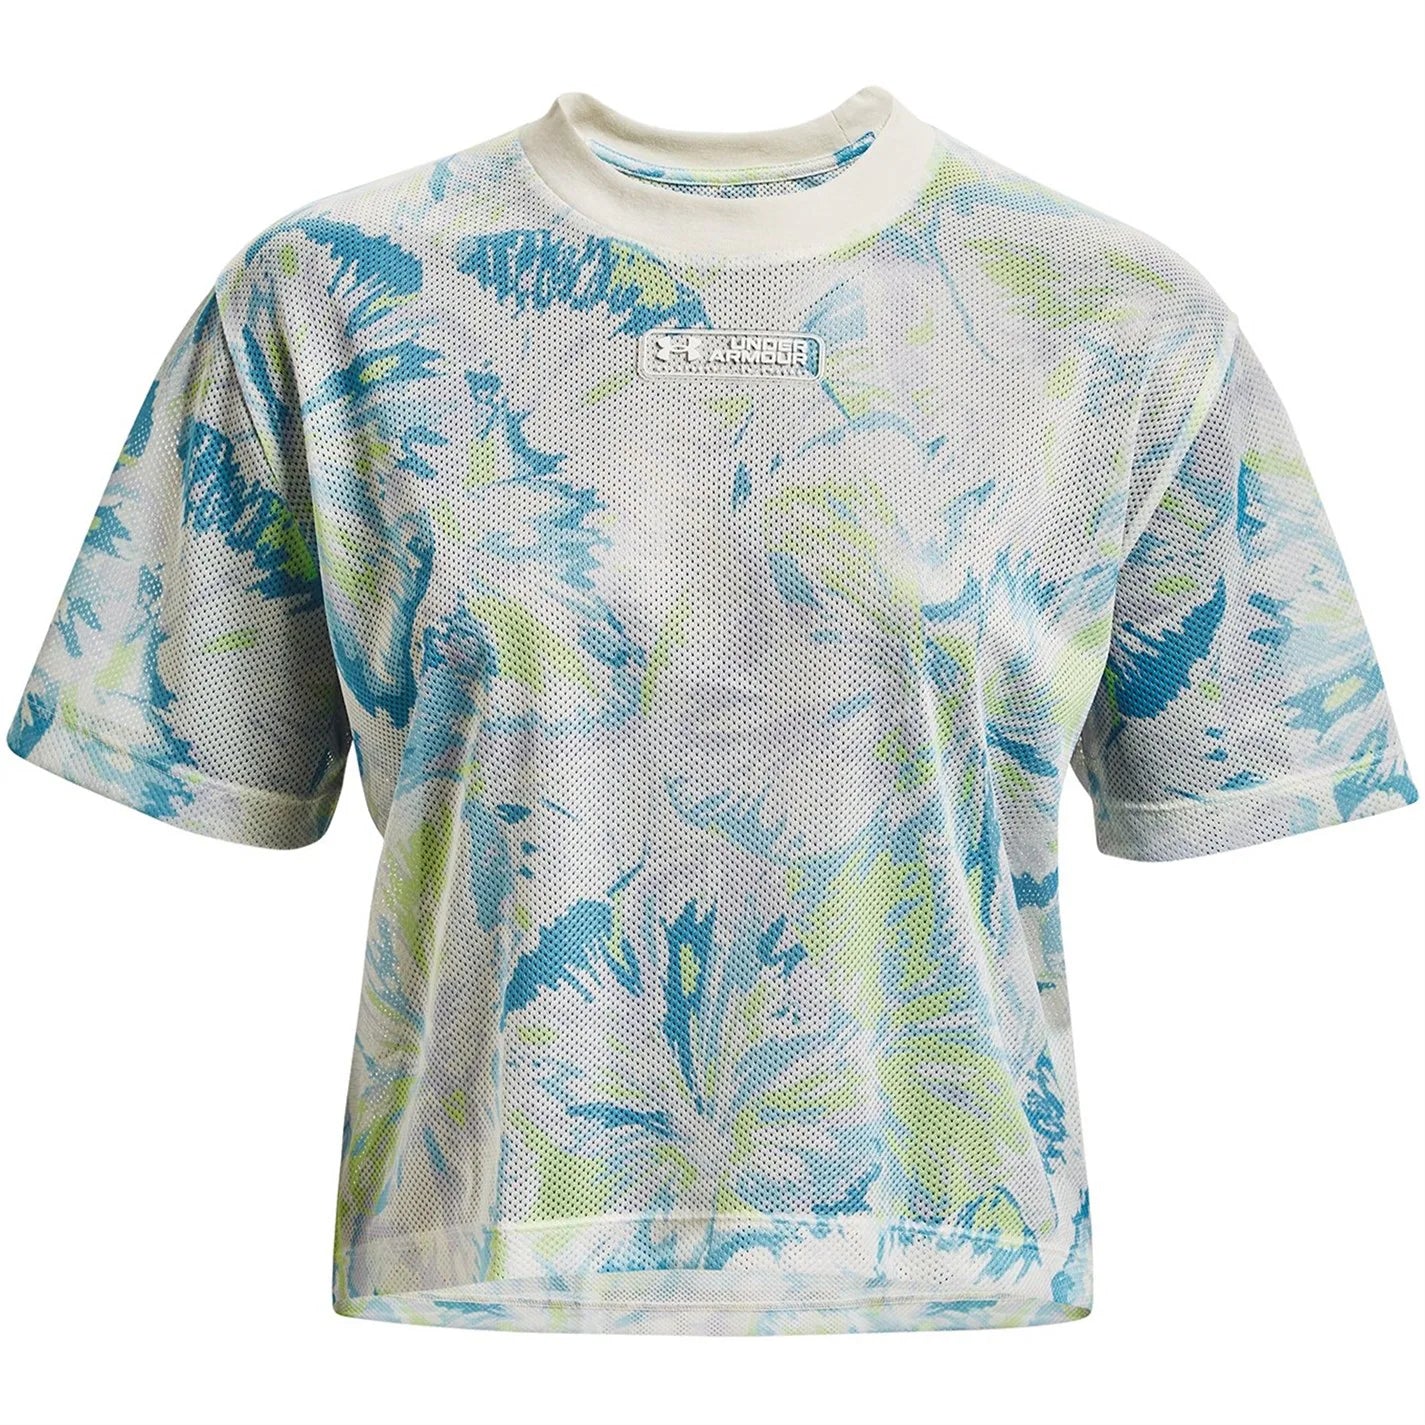 UNDER ARMOUR WOMEN'S MESH PRINTED T SHIRT - FLORAL BLUE